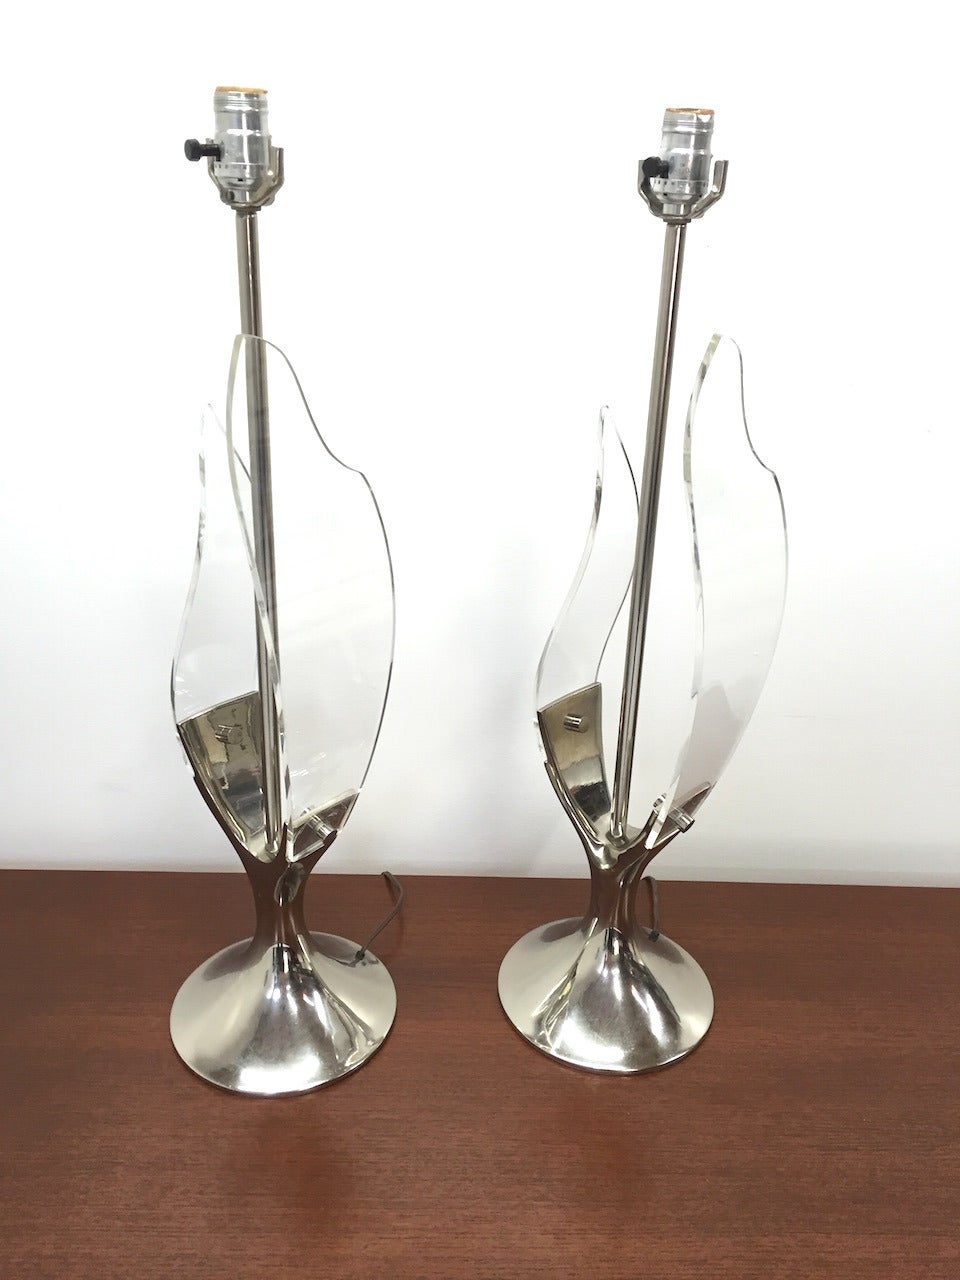 Exceptional Pair of Chrome and Lucite Table Lamps by Laurel Lamp Co. In Excellent Condition For Sale In Long Beach, CA